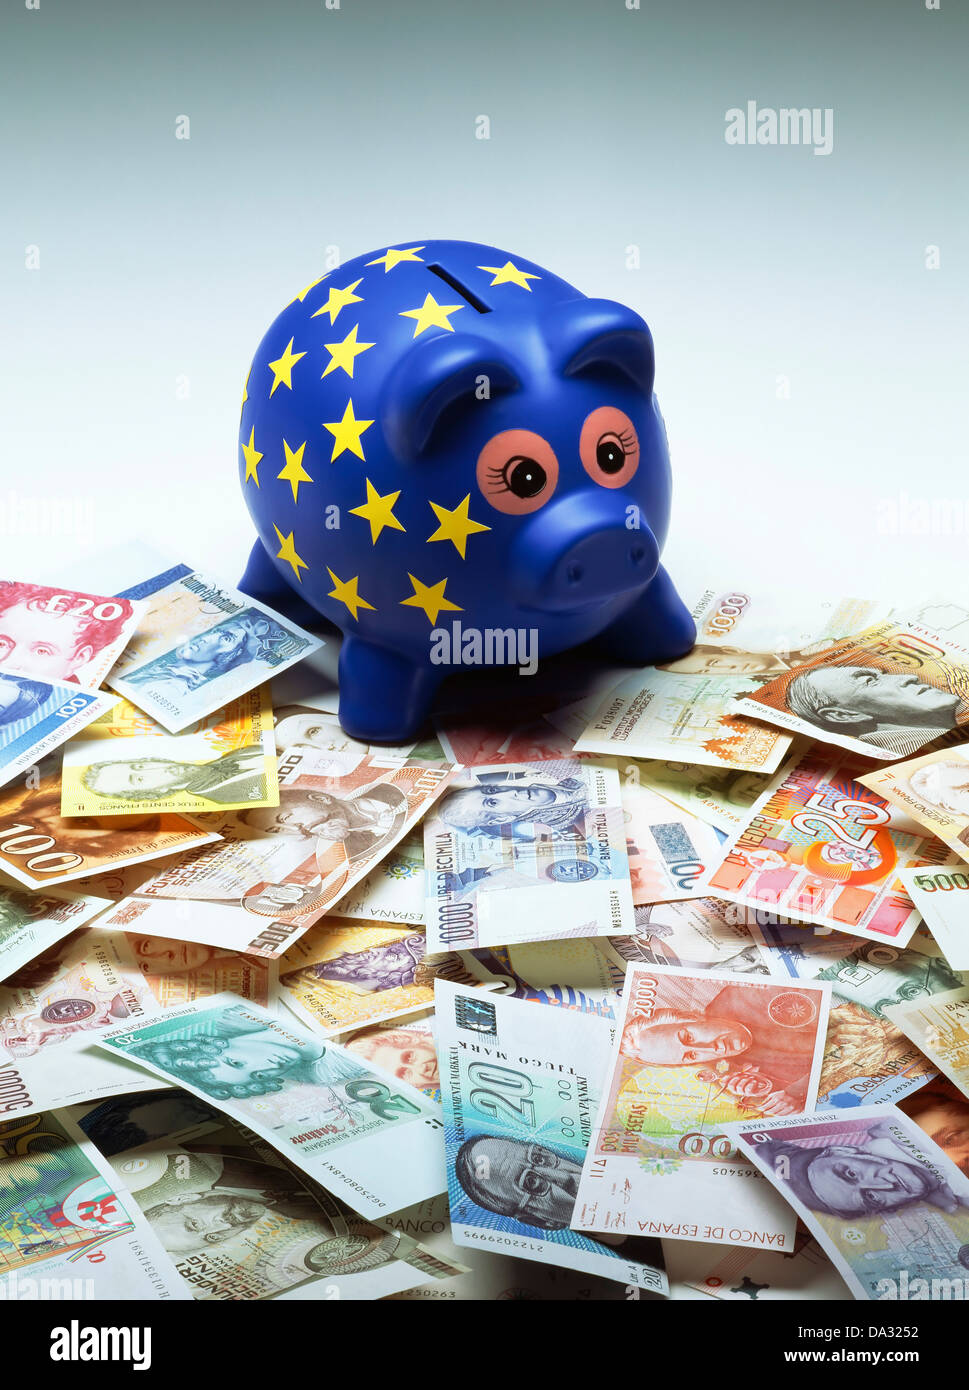 Blue European piggy bank decorated with yellow stars and former banknotes of the European countries forming the Euro Stock Photo